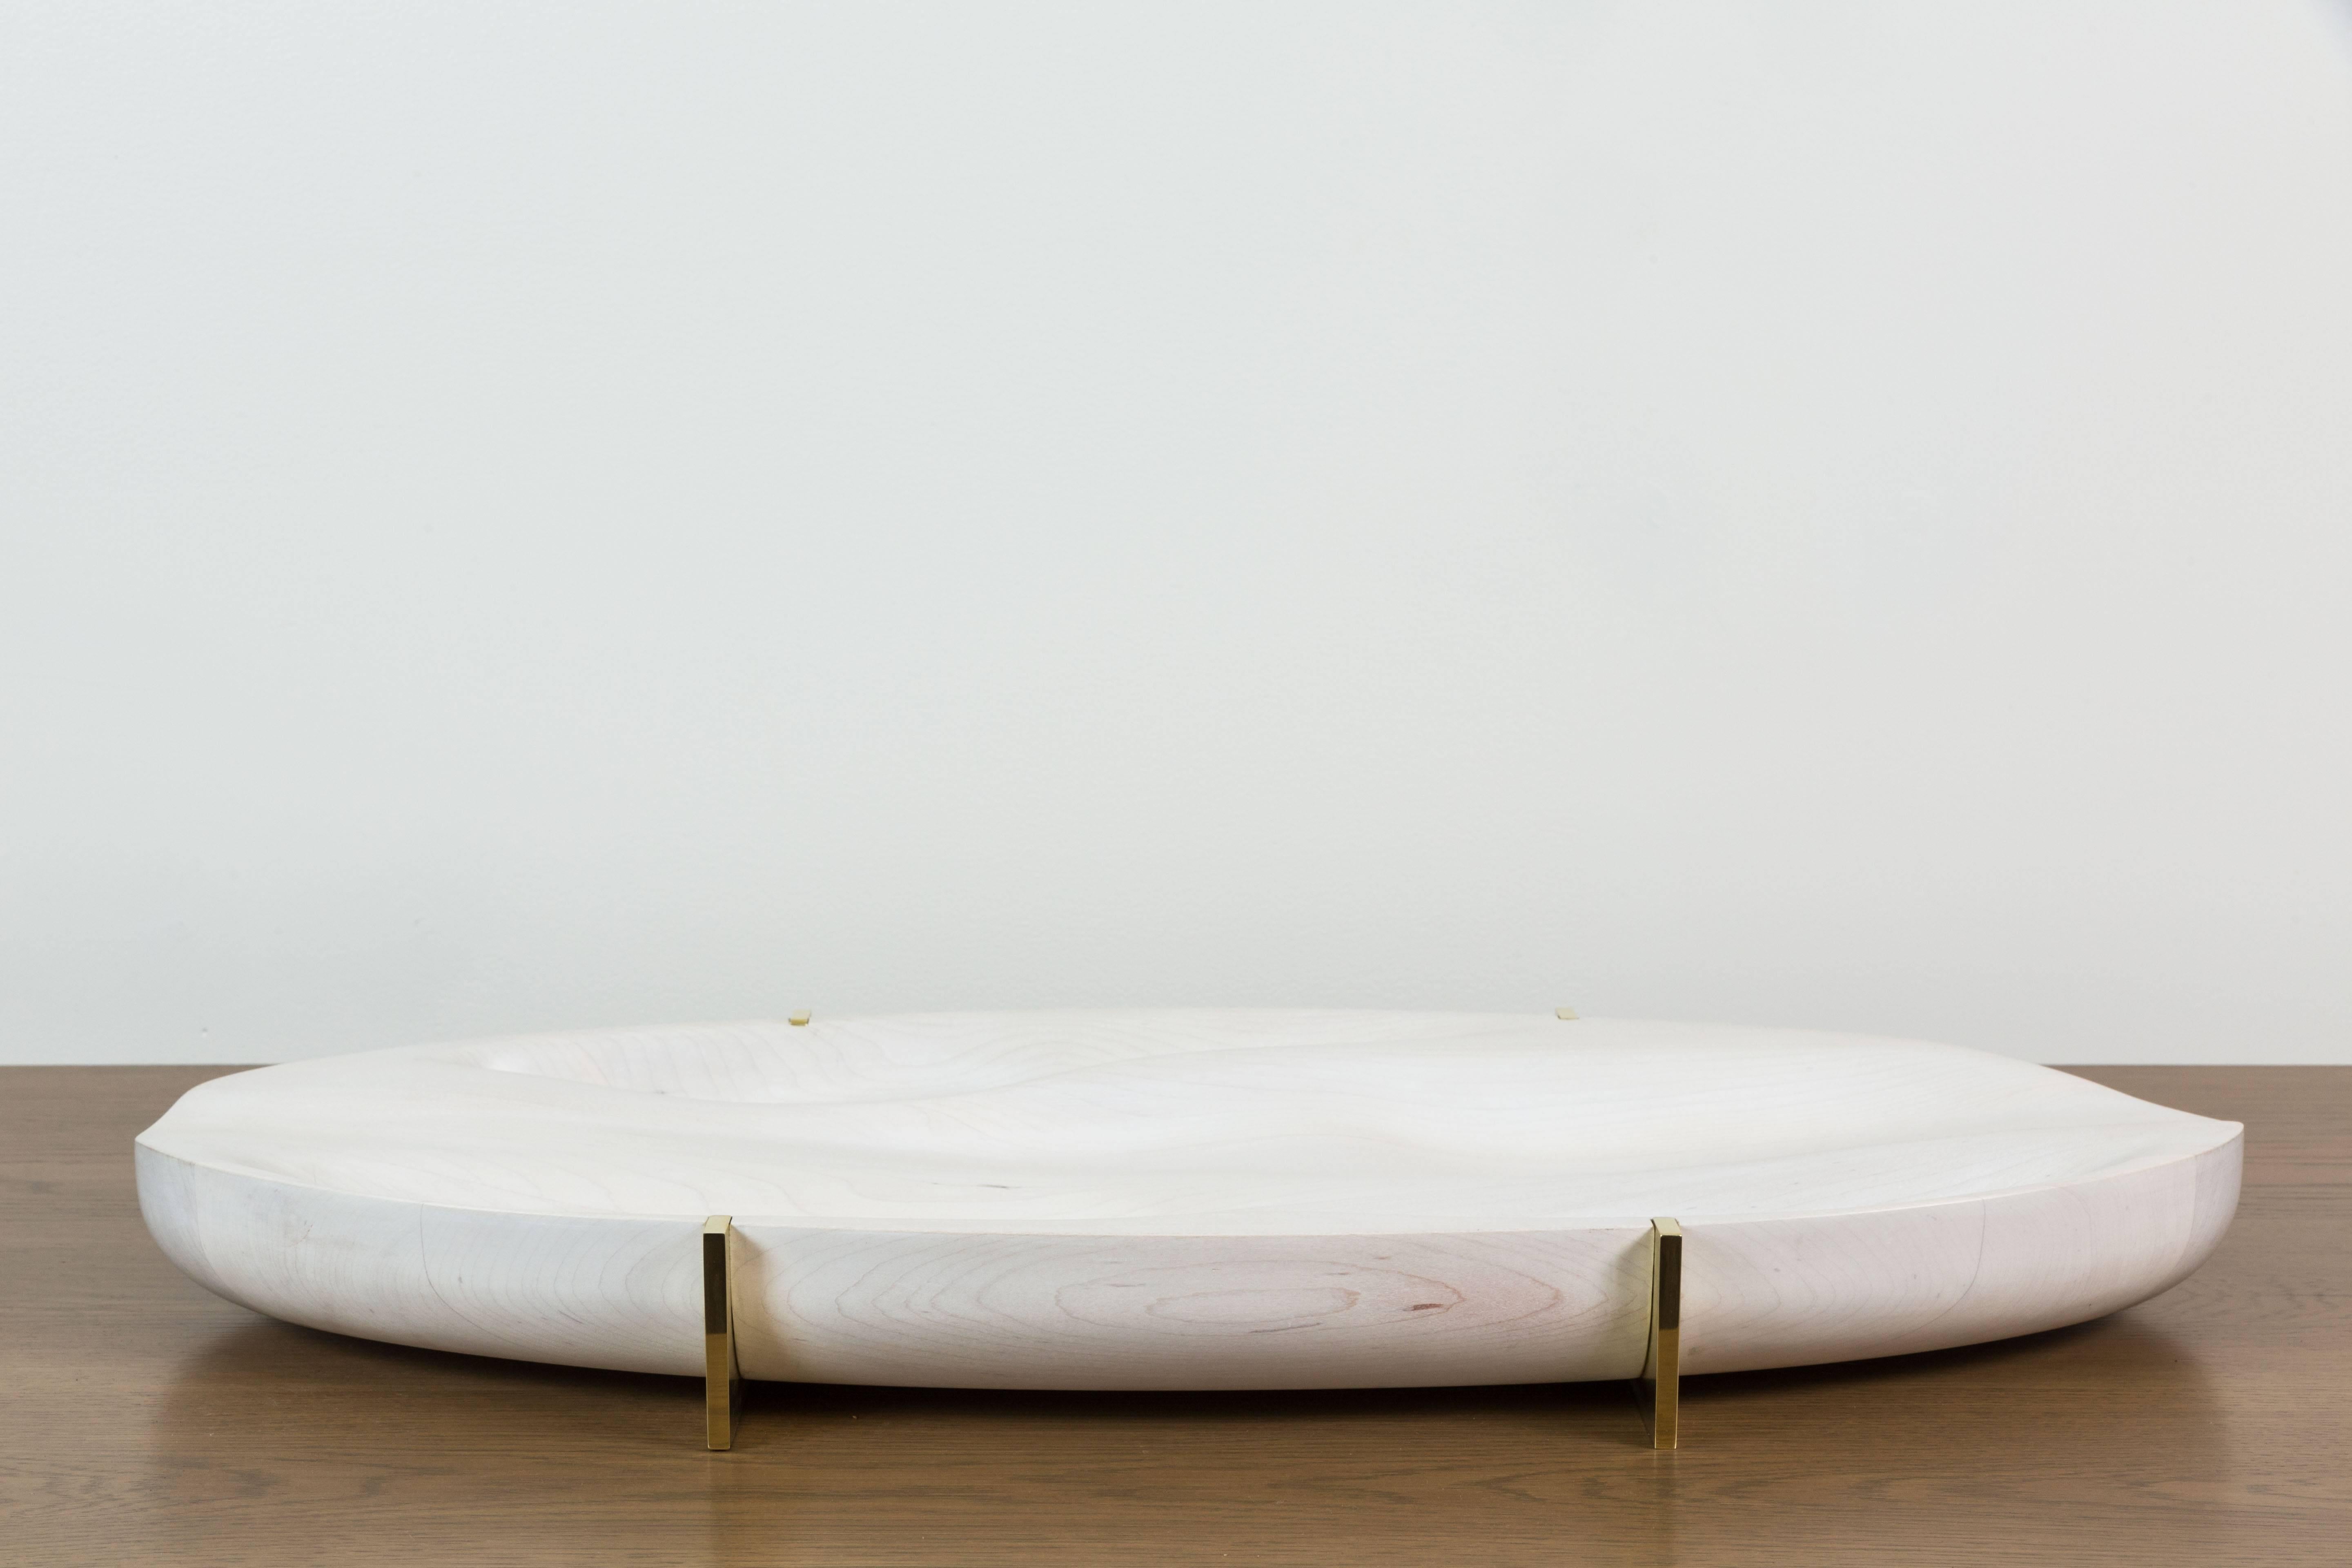 Bleached white maple and brass oval tray by artist Vincent Pocsik in collaboration with Lawson-Fenning. Features sculptural carved wood and a machined brass base. Made of natural materials, this decorative object can be accessorized on table top,